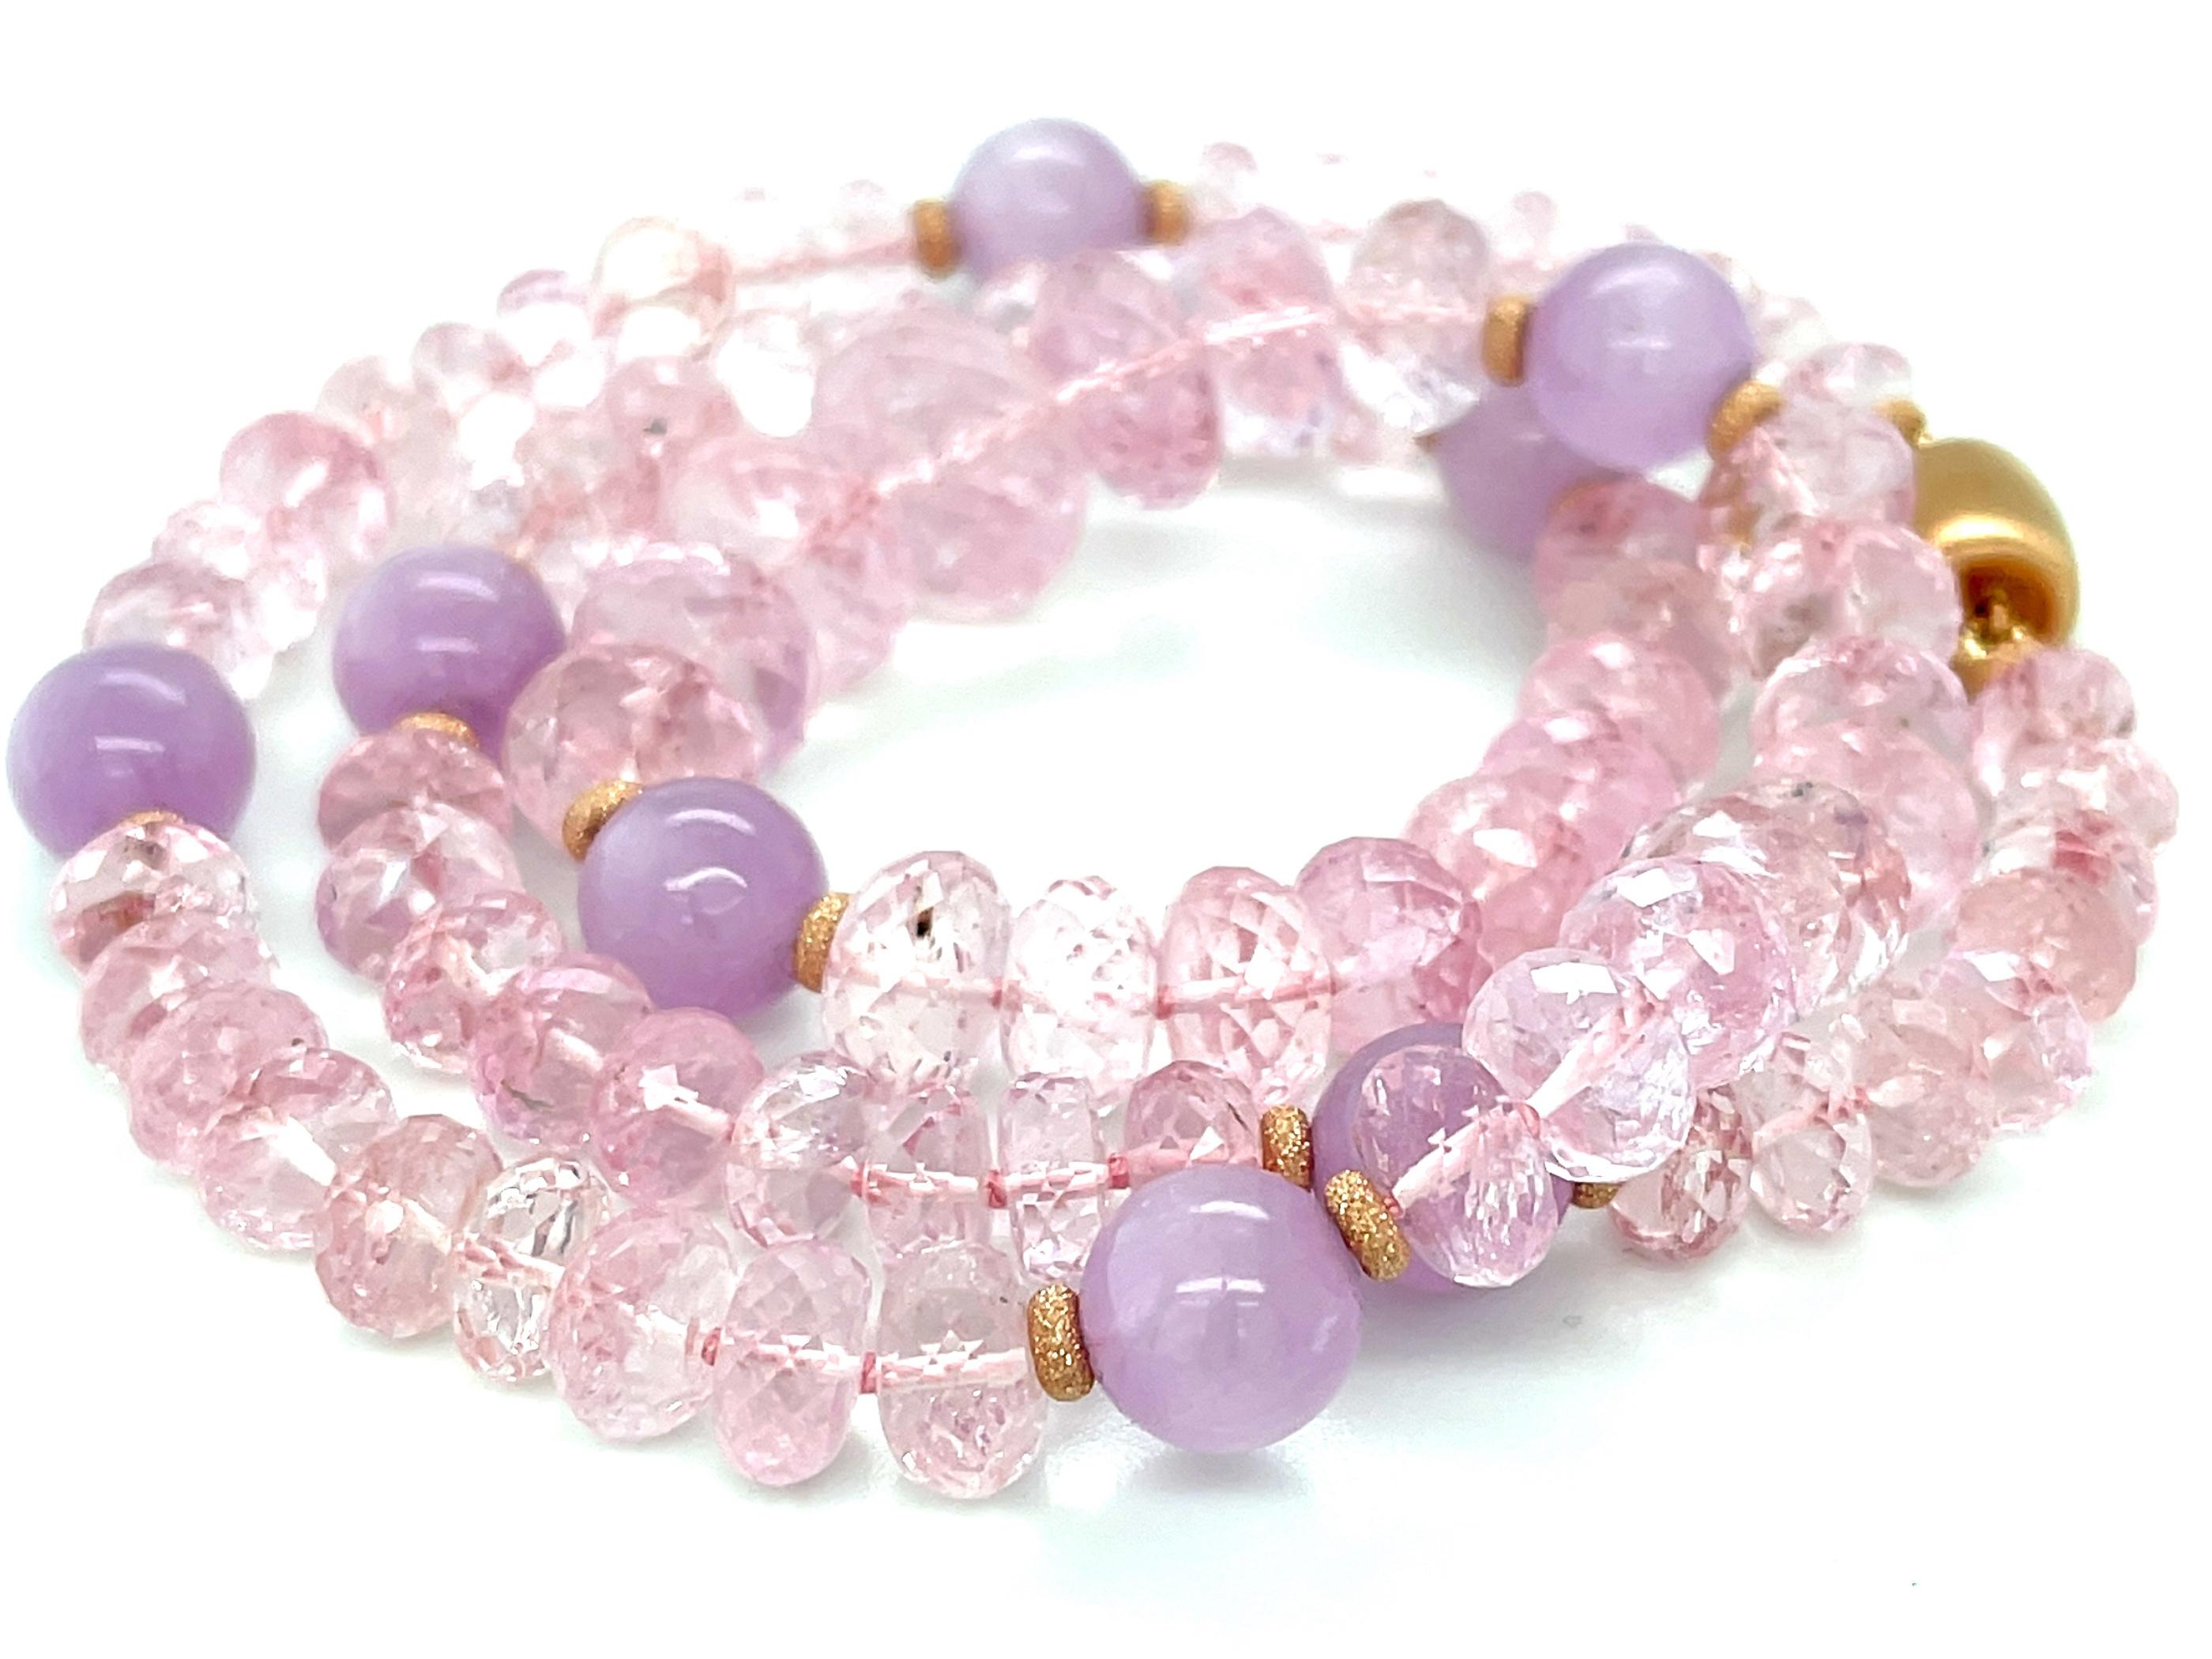 This beautiful rose quartz and kunzite bead necklace features a gorgeous pairing of sparking rose quartz and translucent kunzite beads, combined with 14k rose gold accents! The transparent rose quartz beads are rondel shaped, with facets that